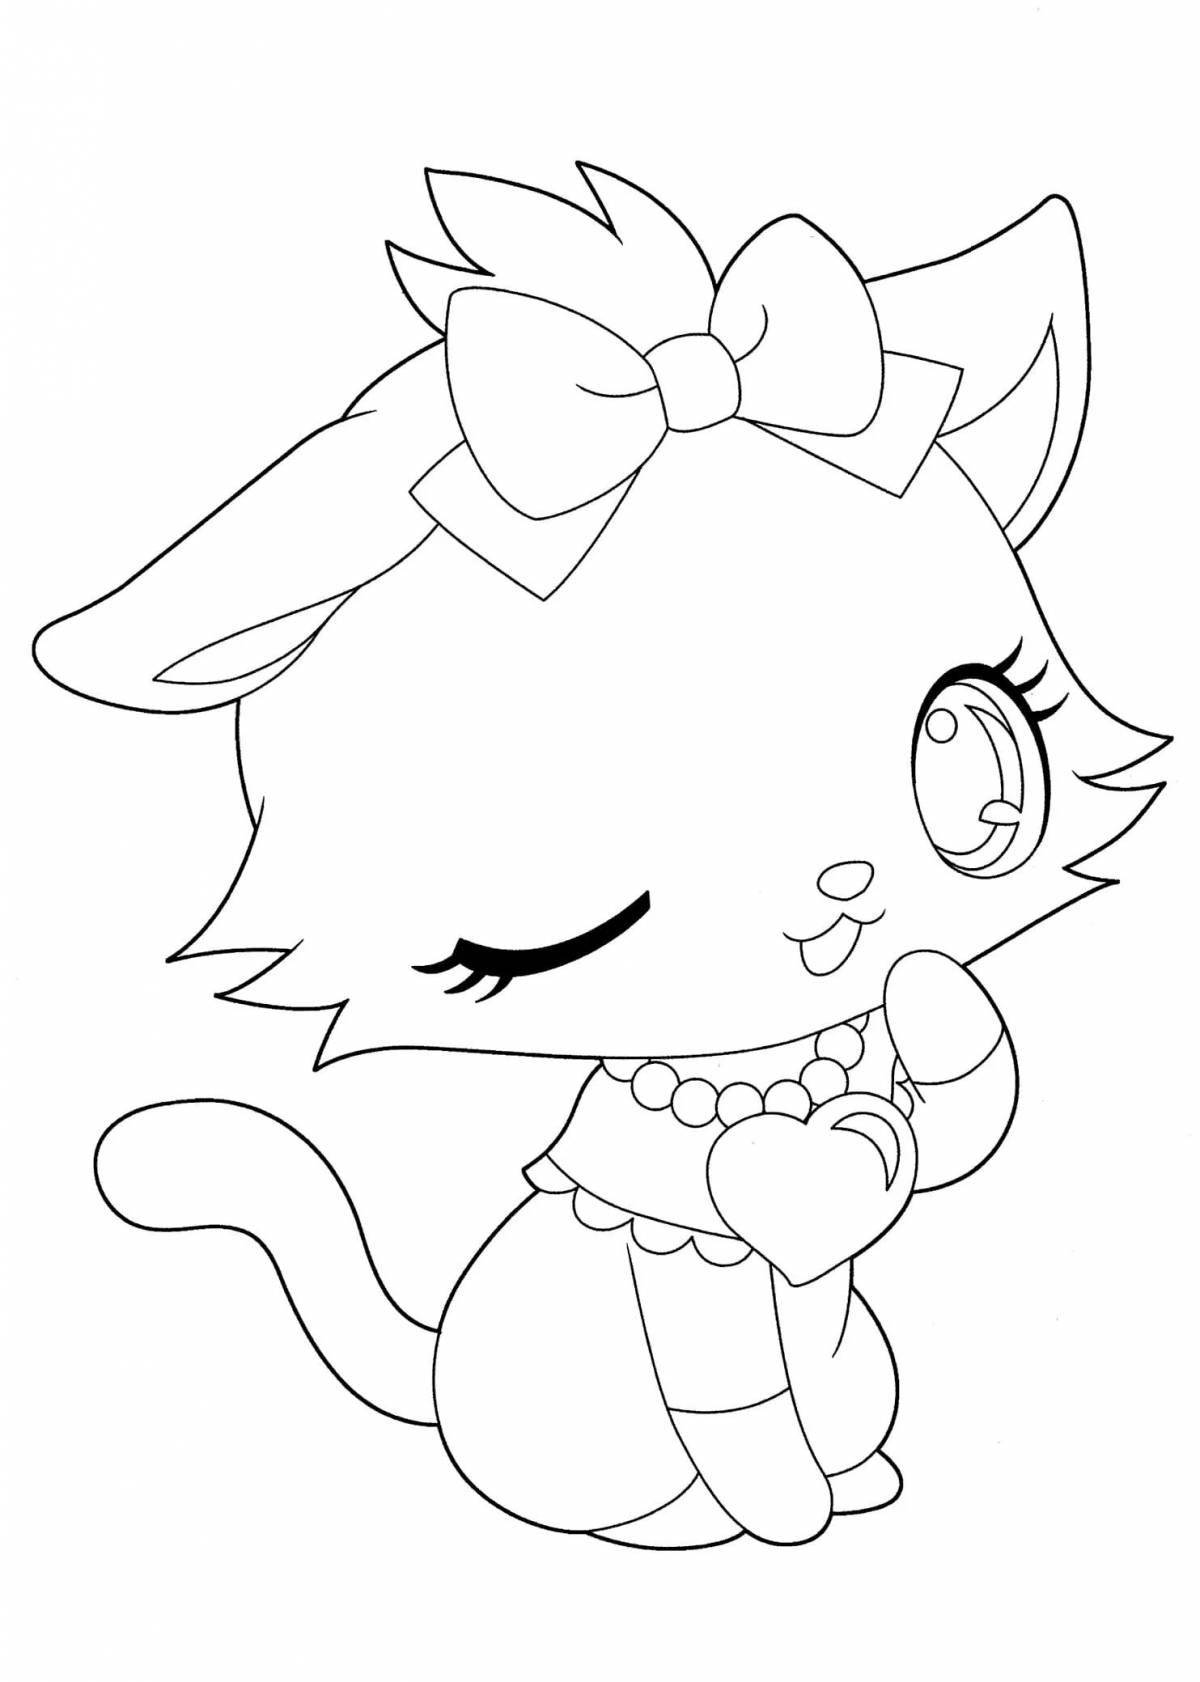 Caring kittens coloring page